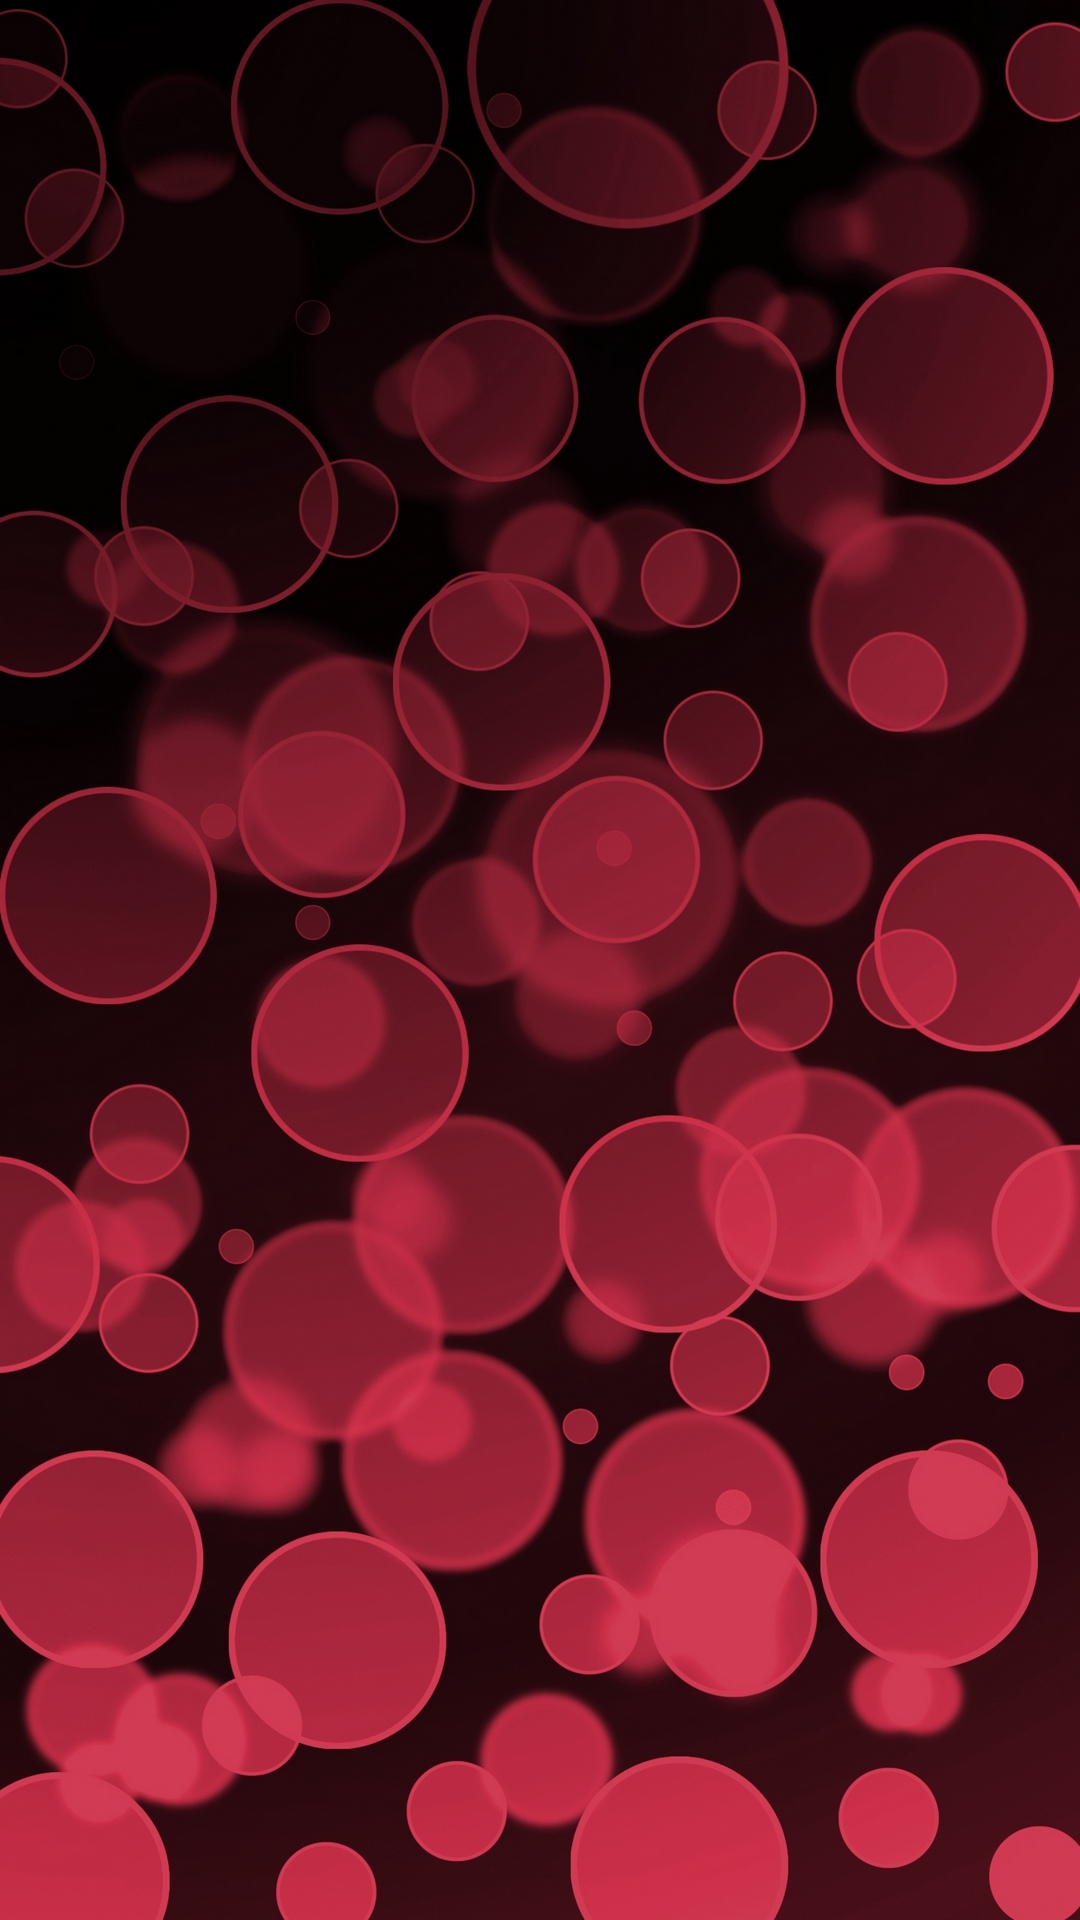 Galaxy s4 background with abstract design red circles on black 1080x1920